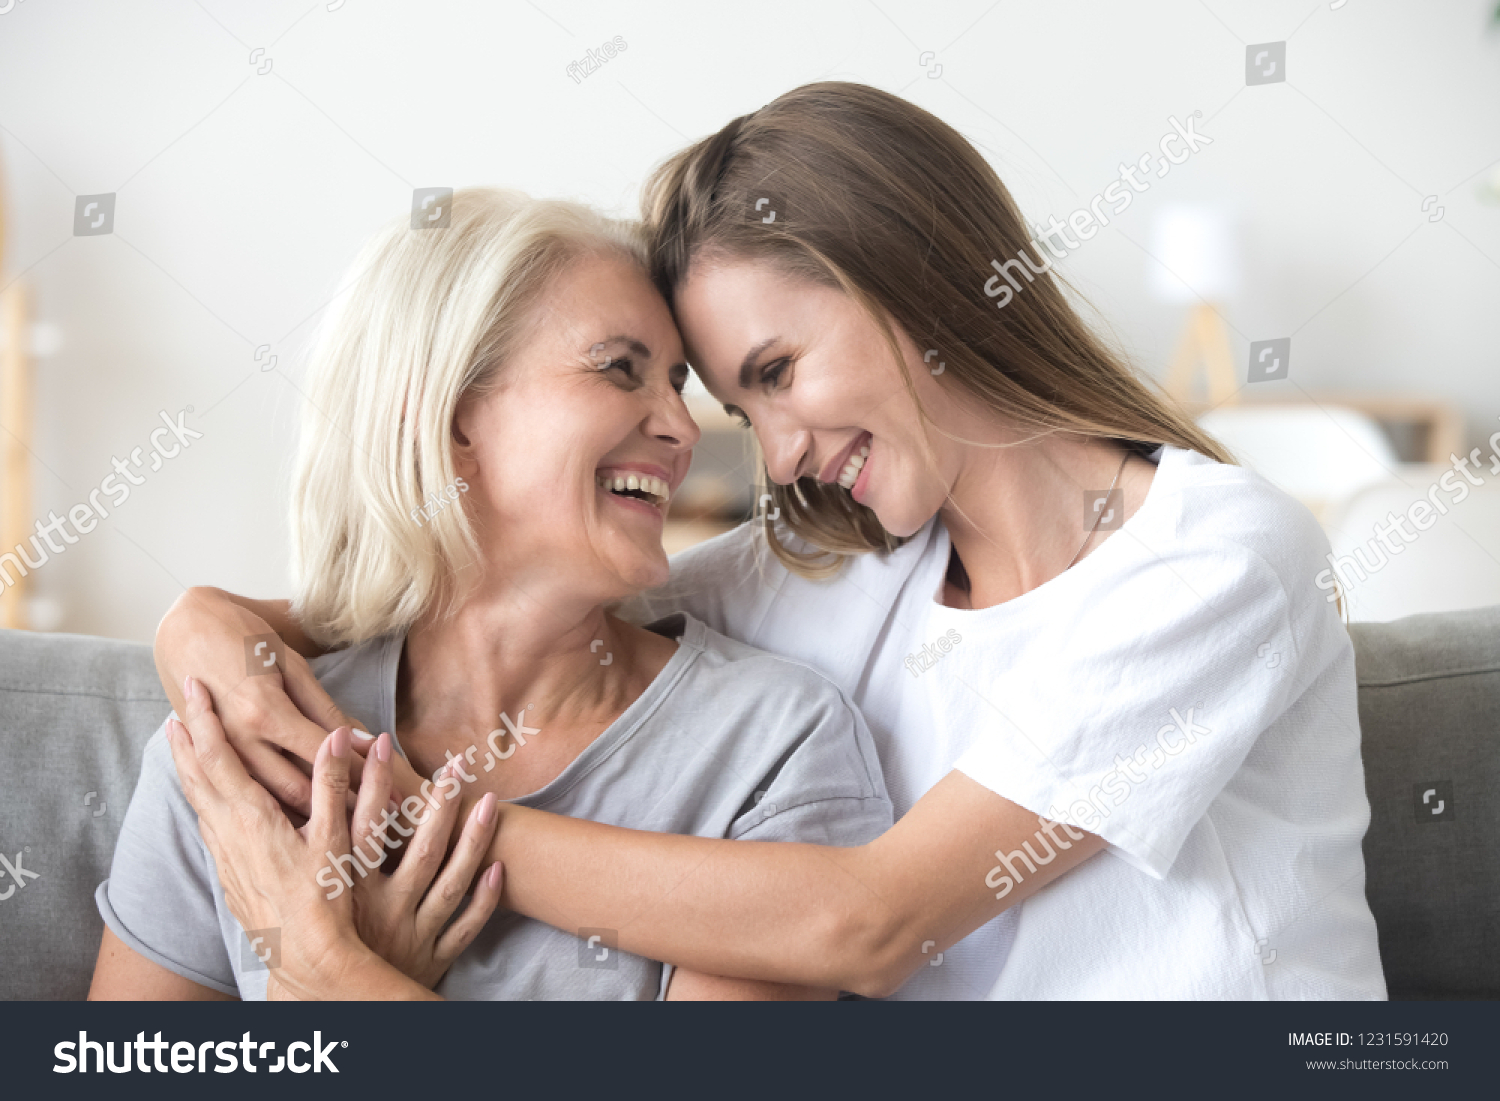 Happy loving older mature mother and grown millennial daughter laughing embracing, caring smiling young woman embracing happy senior middle aged mom having fun at home spending time together #1231591420